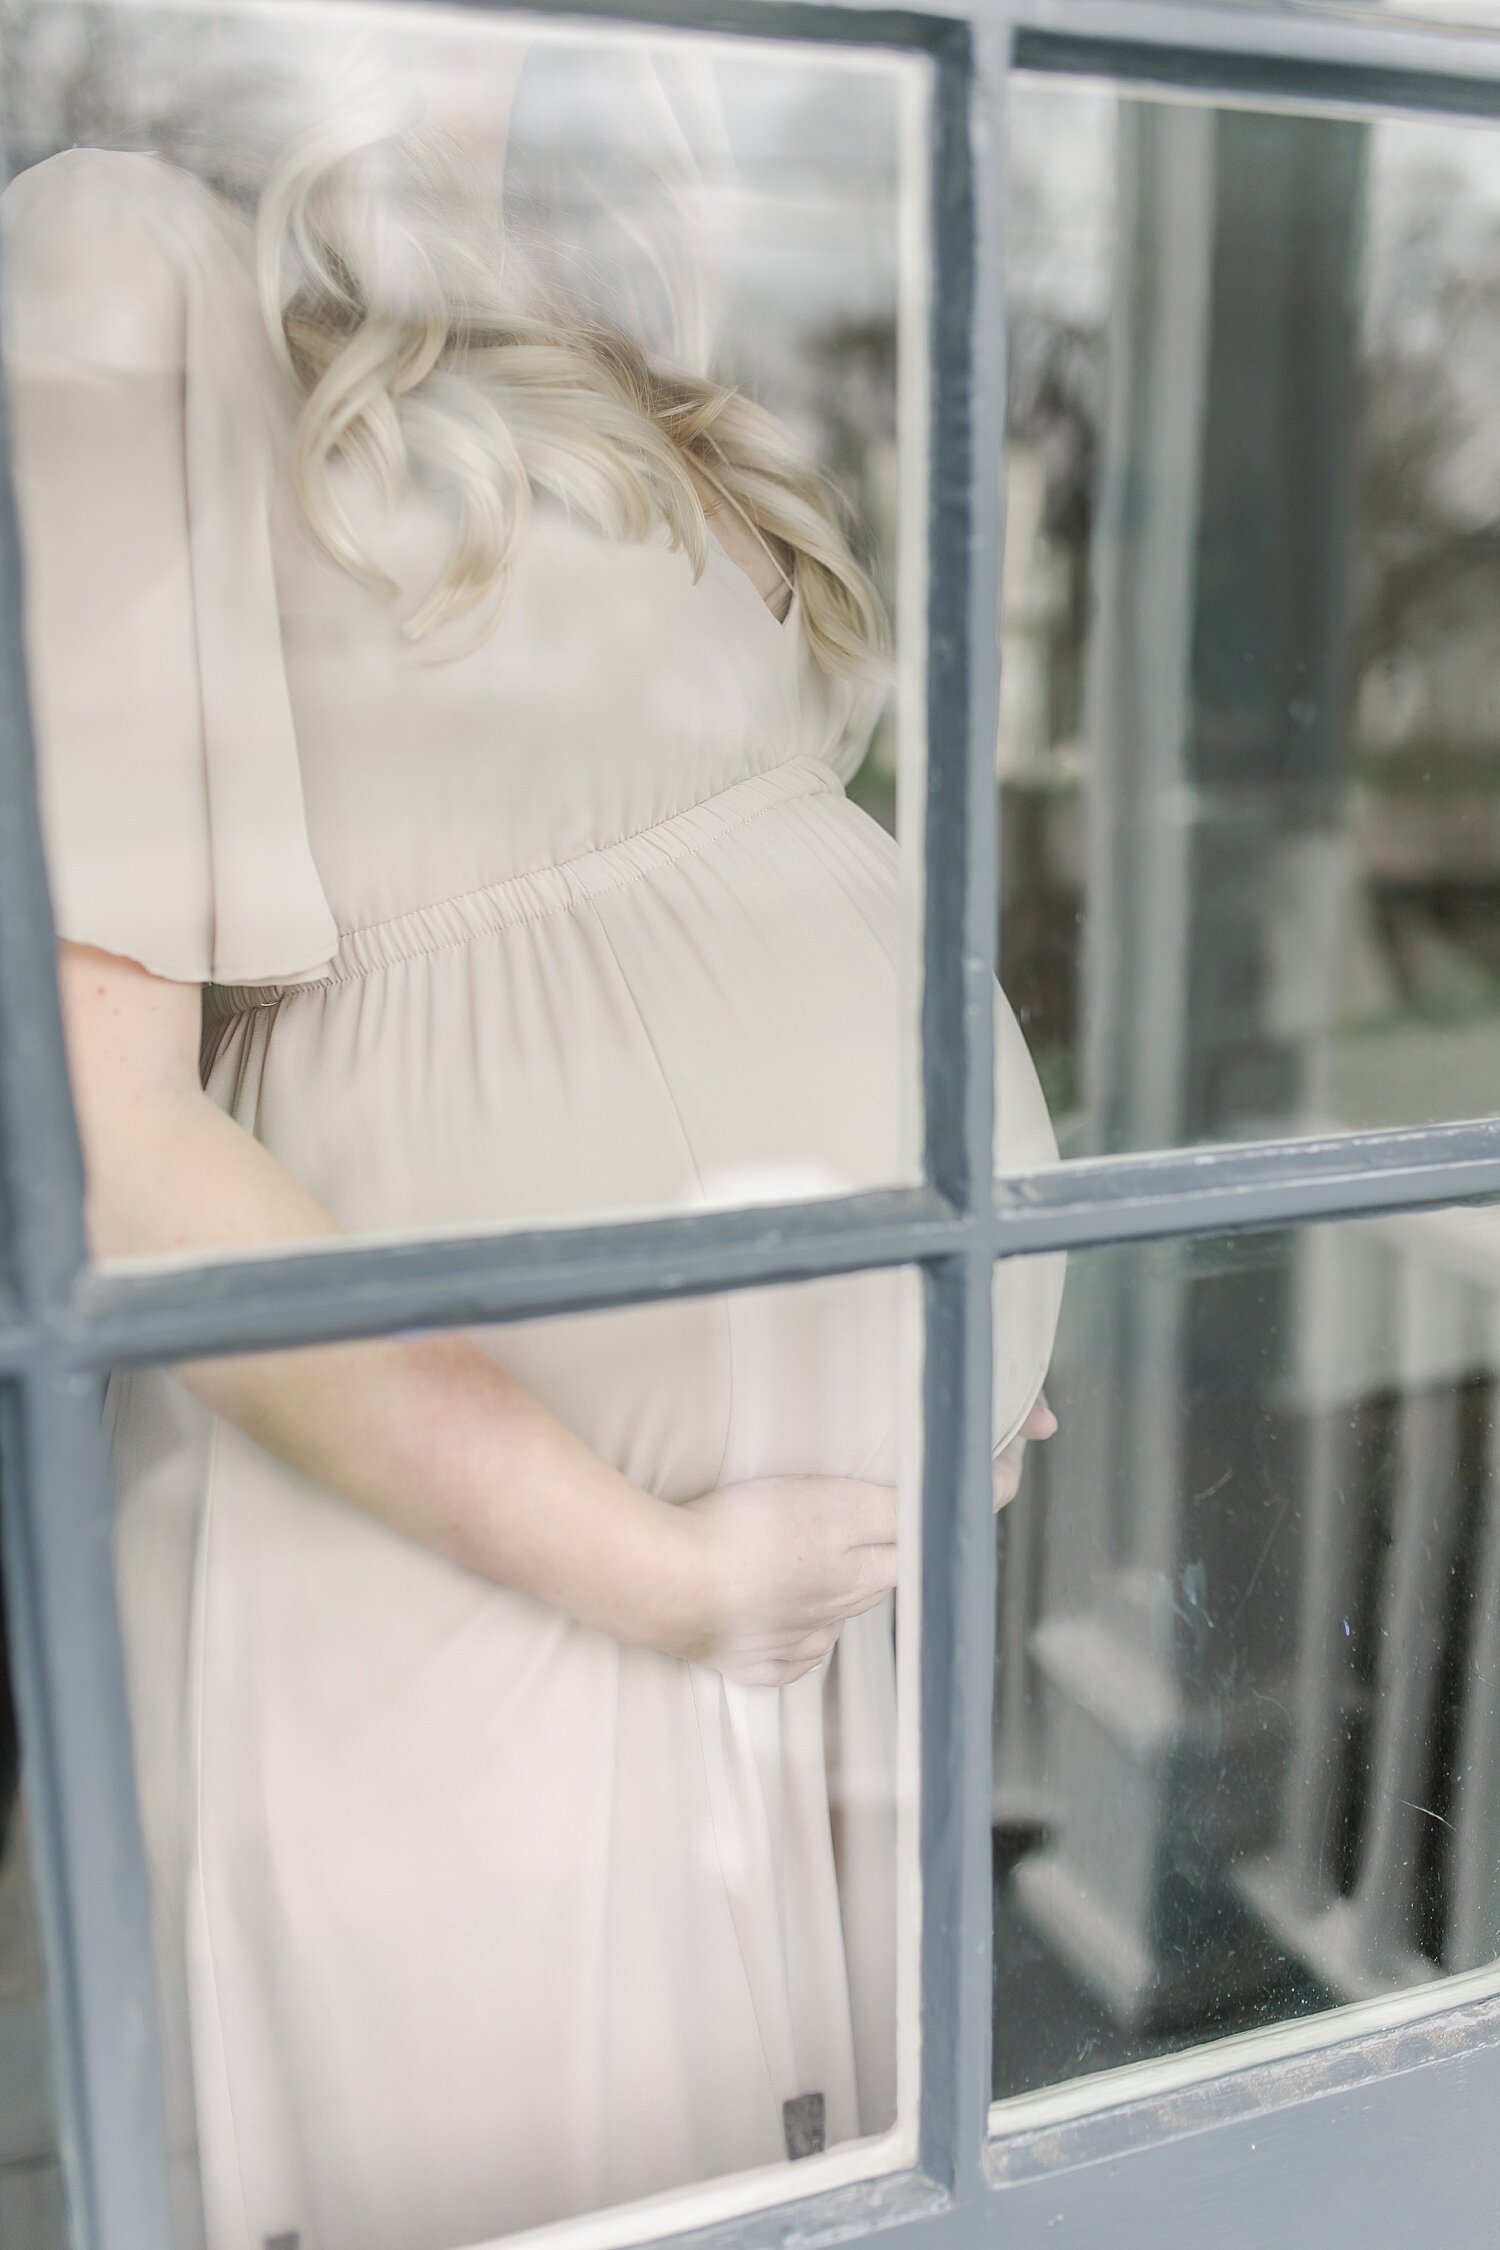 Pregnancy photoshoot in home. Photographer, Kristin Wood Photography, takes photo from outside the door.